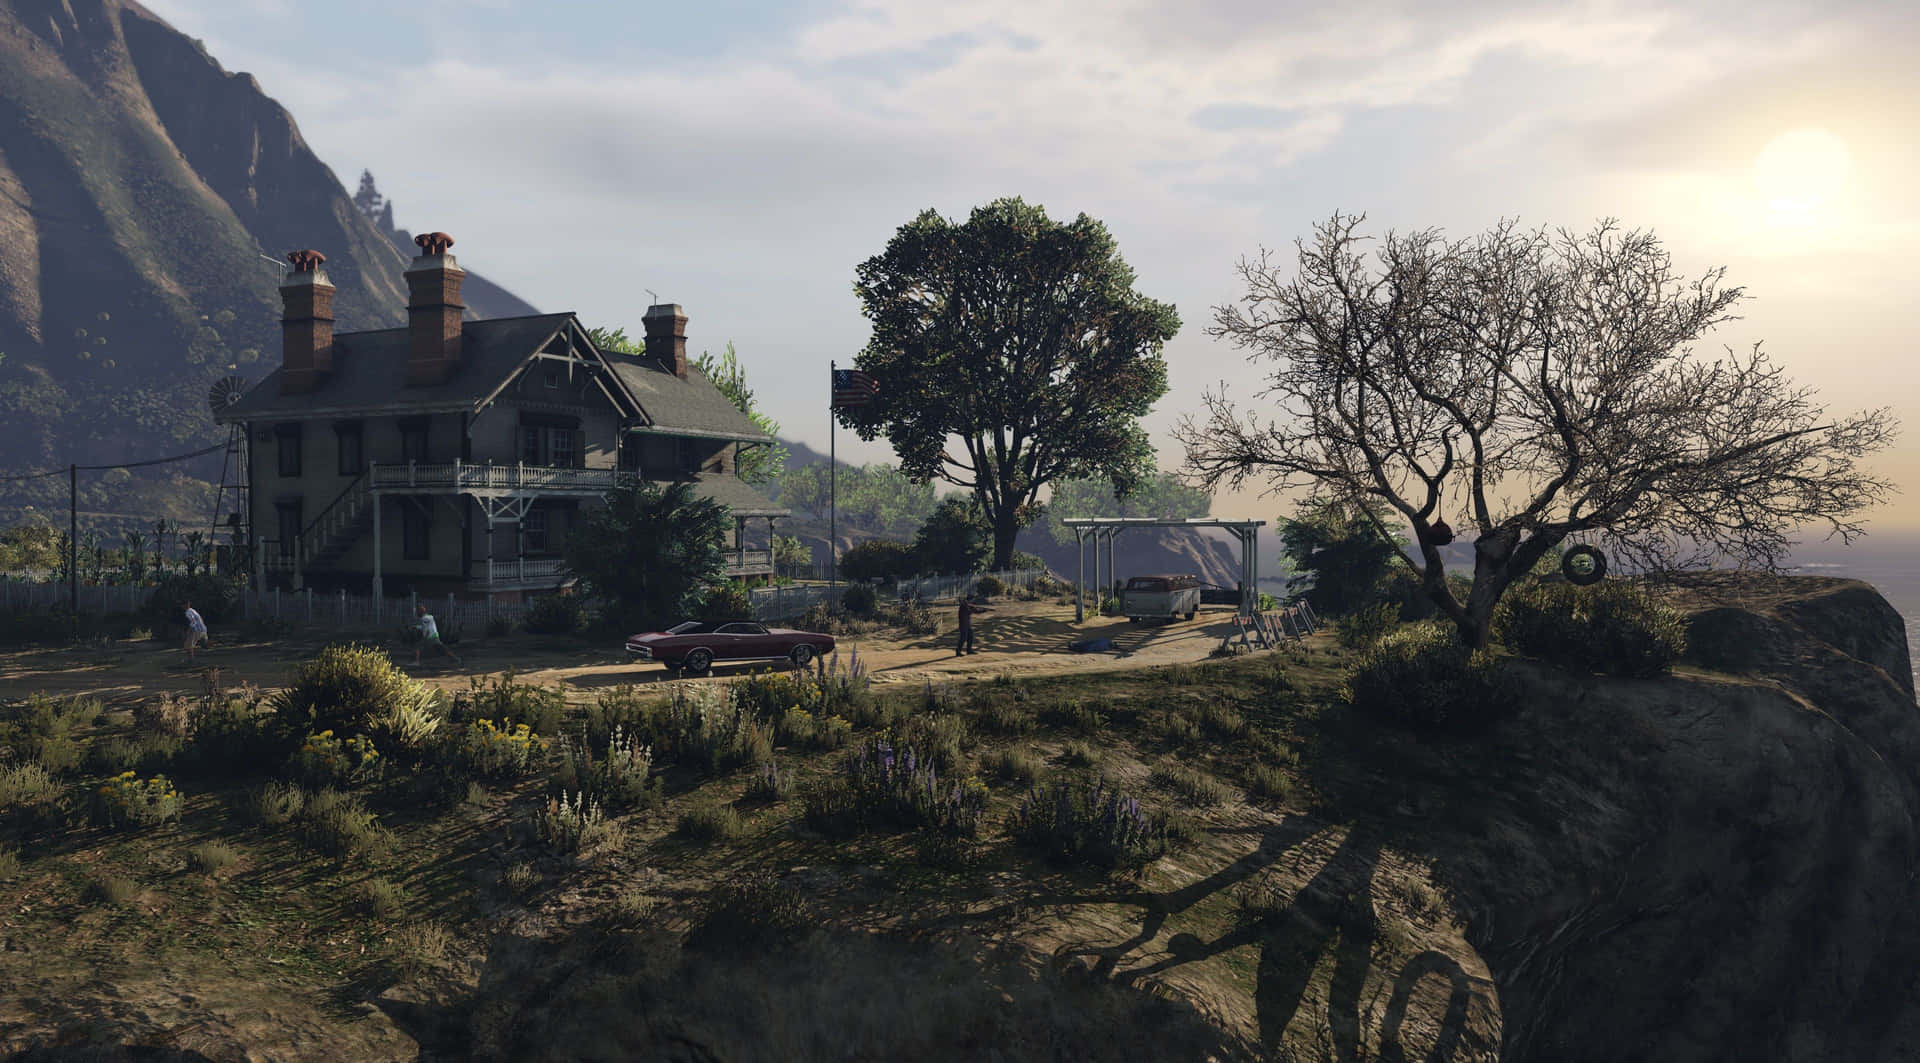 Master the world of GTA 5 with an immersive desktop experience. Wallpaper